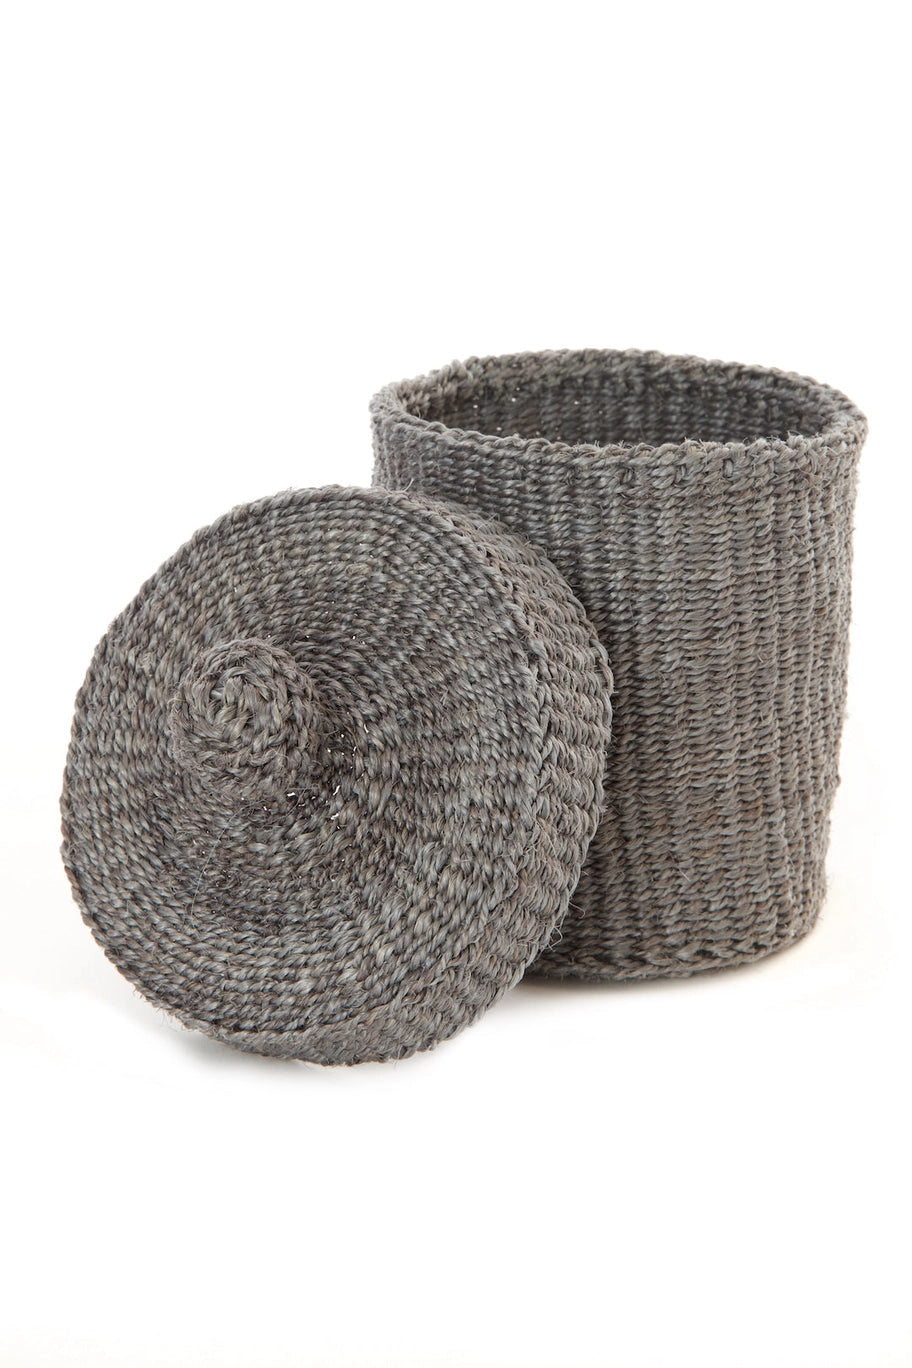 Sisal Lidded Container Basket | Gray